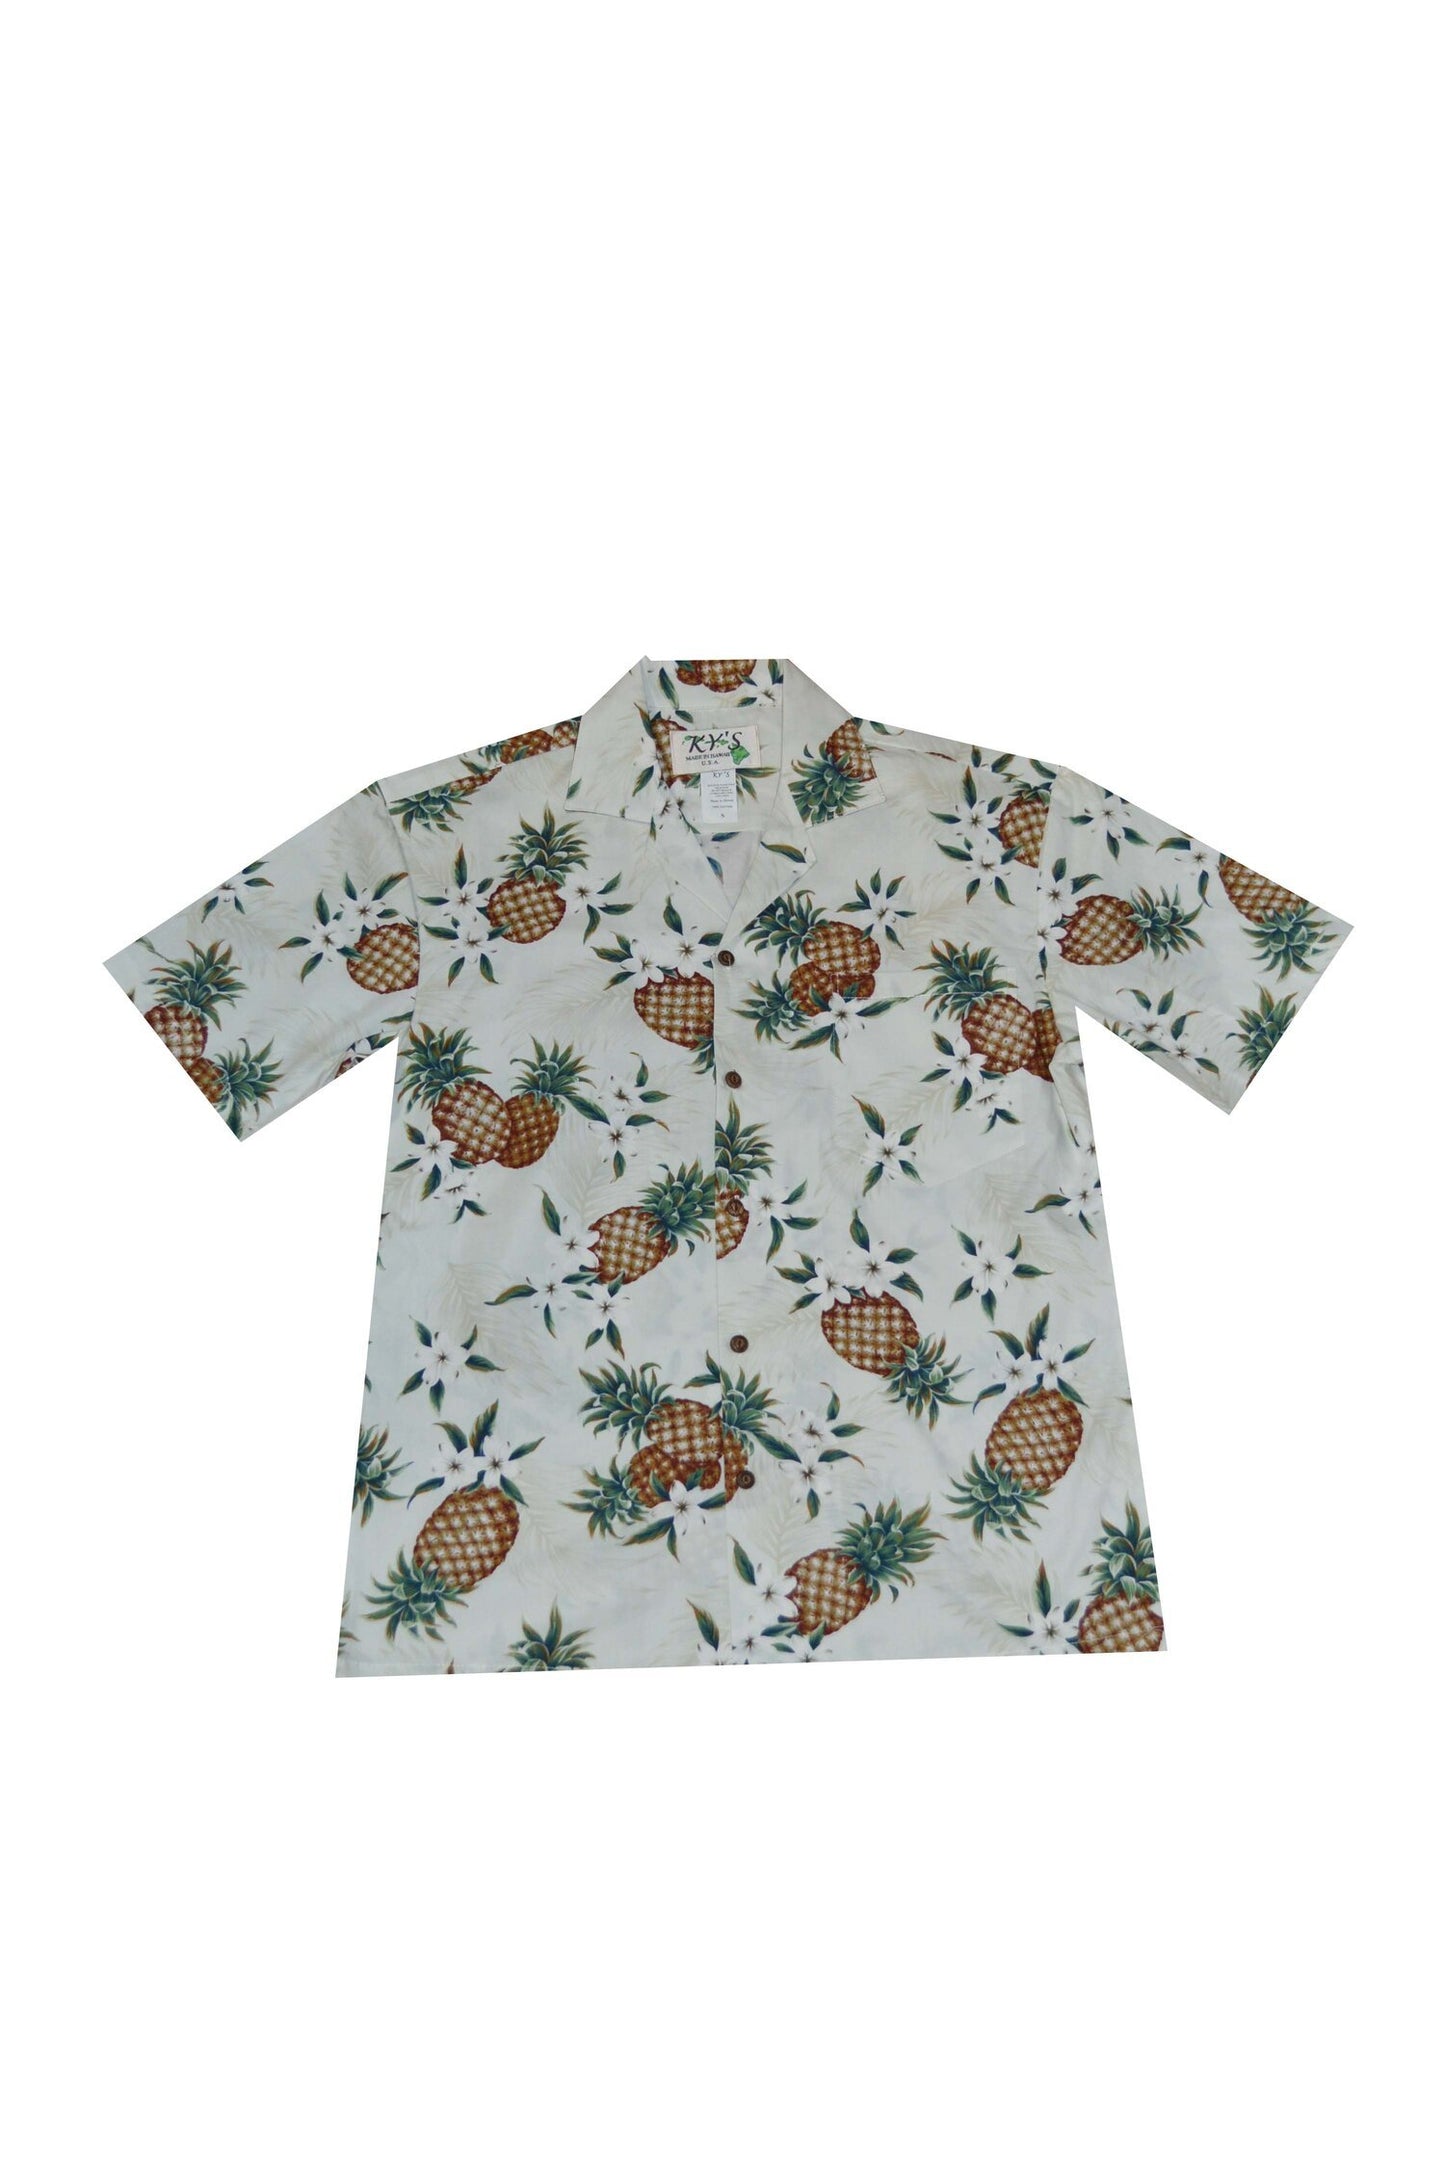 Family Matching Outfits Pineapple Gardens Made in Hawaii 100% Cotton